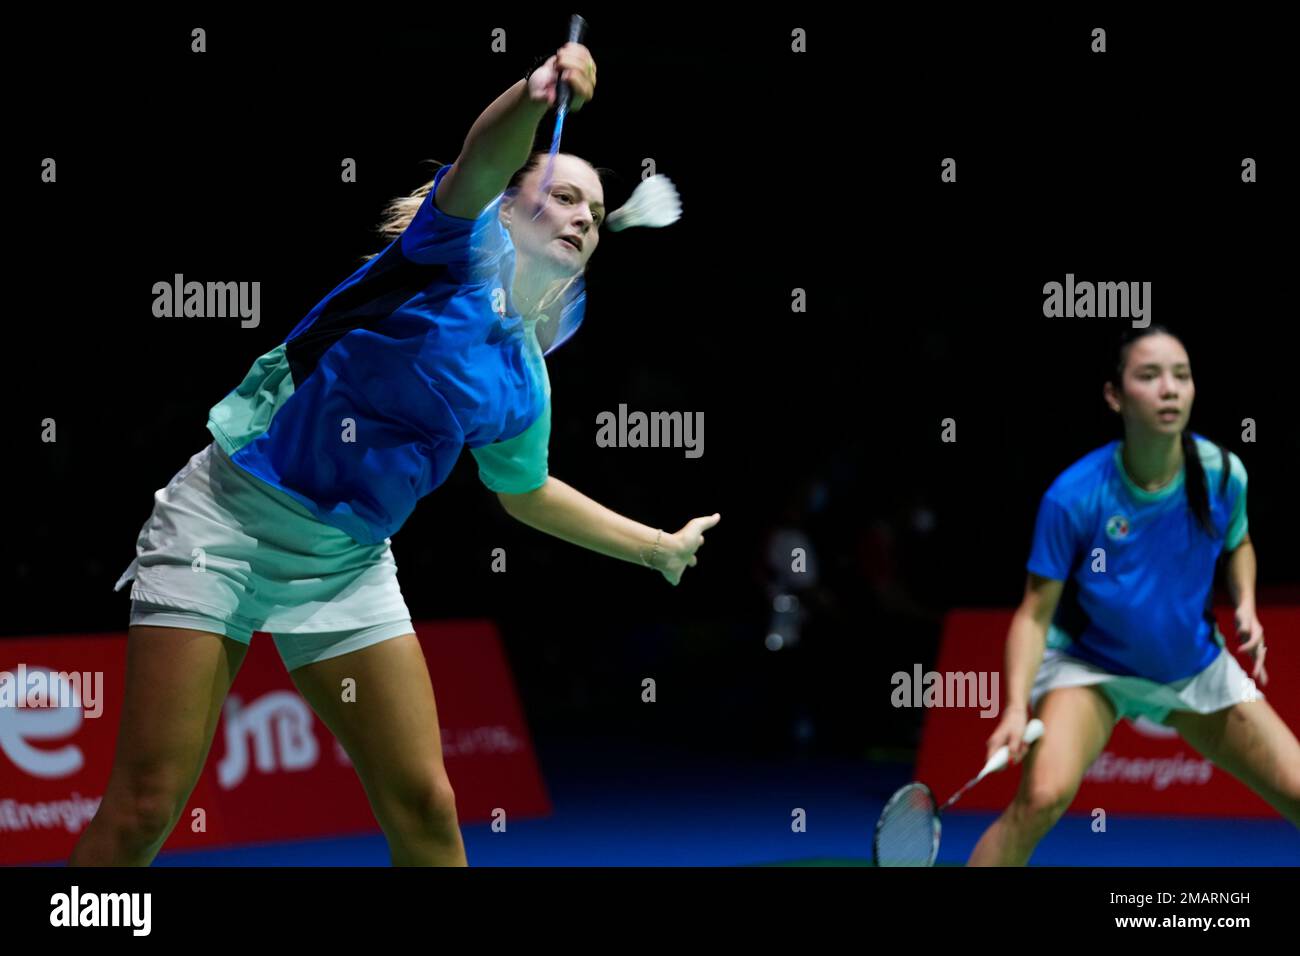 Judith Mair of Italy, left, with Martina Corsini, plays a return in a  badminton game of the women's doubles against Shikha Gautam and Ashwini  Bhat K. of India in the BWF World